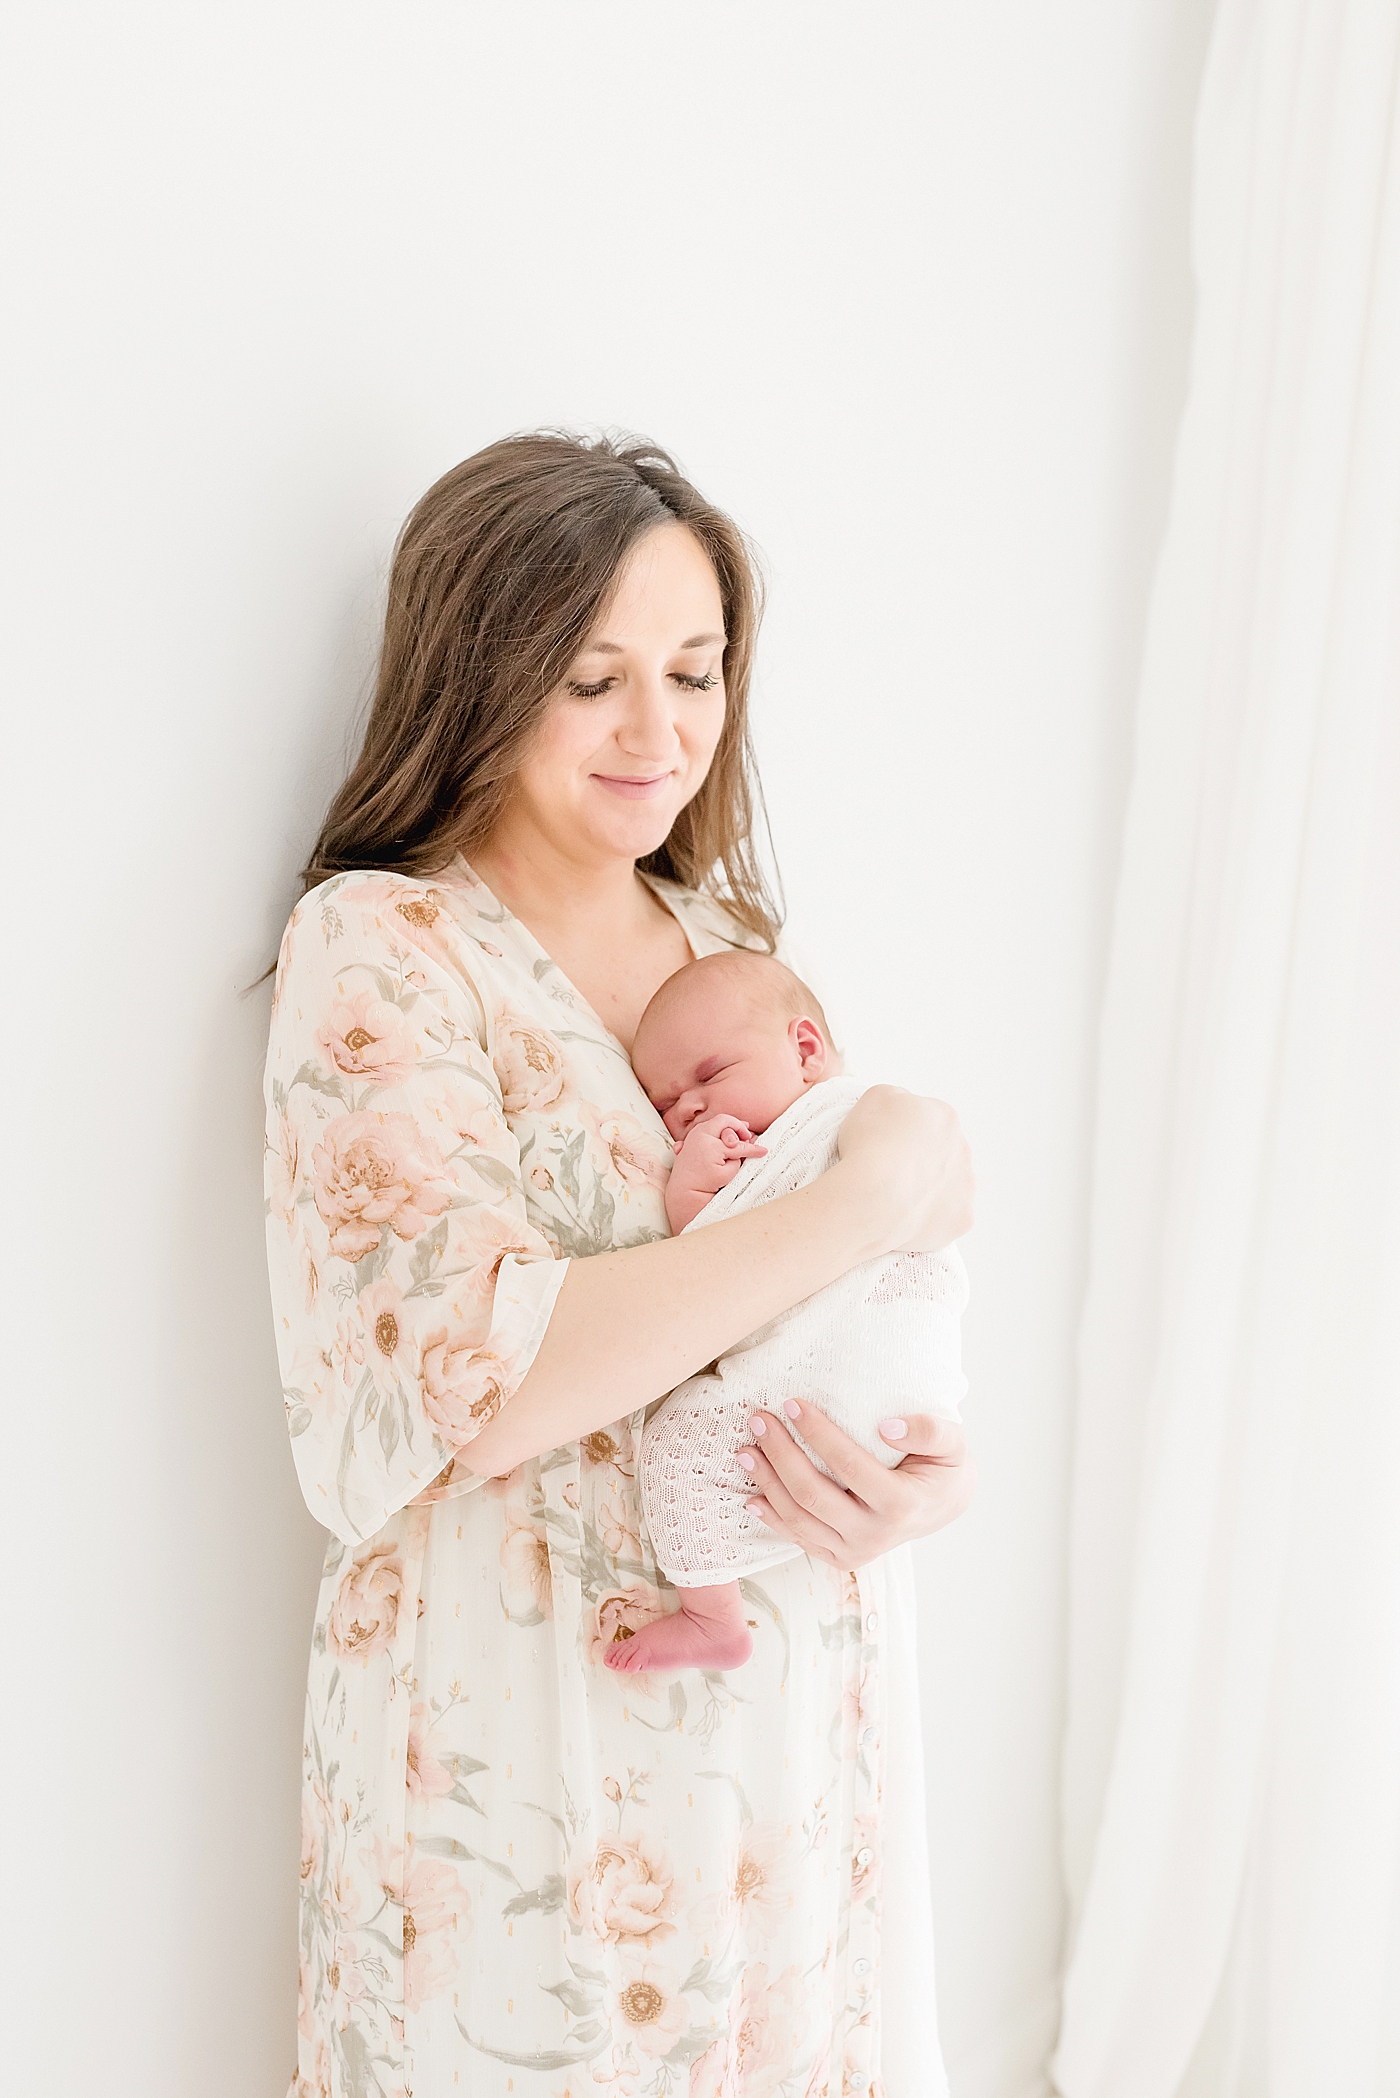 Mom in a floral print dress holding newborn | Photo by Anna Wisjo Photography